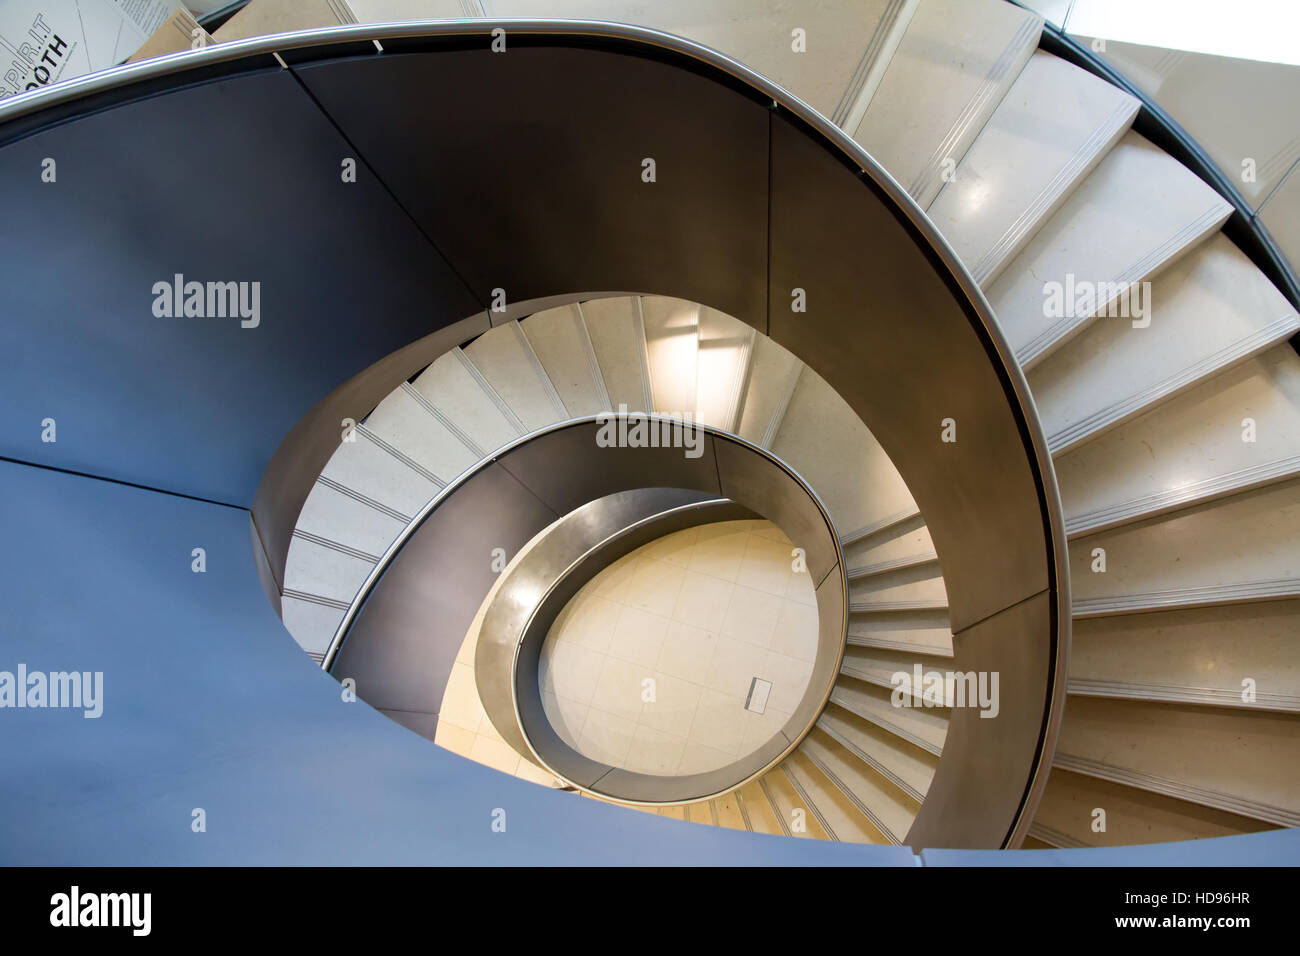 The modern spiral staircase at the Wellcome Trust Collection Museum, London England. Designed by Wilkinson Eyre Architects. Stock Photo